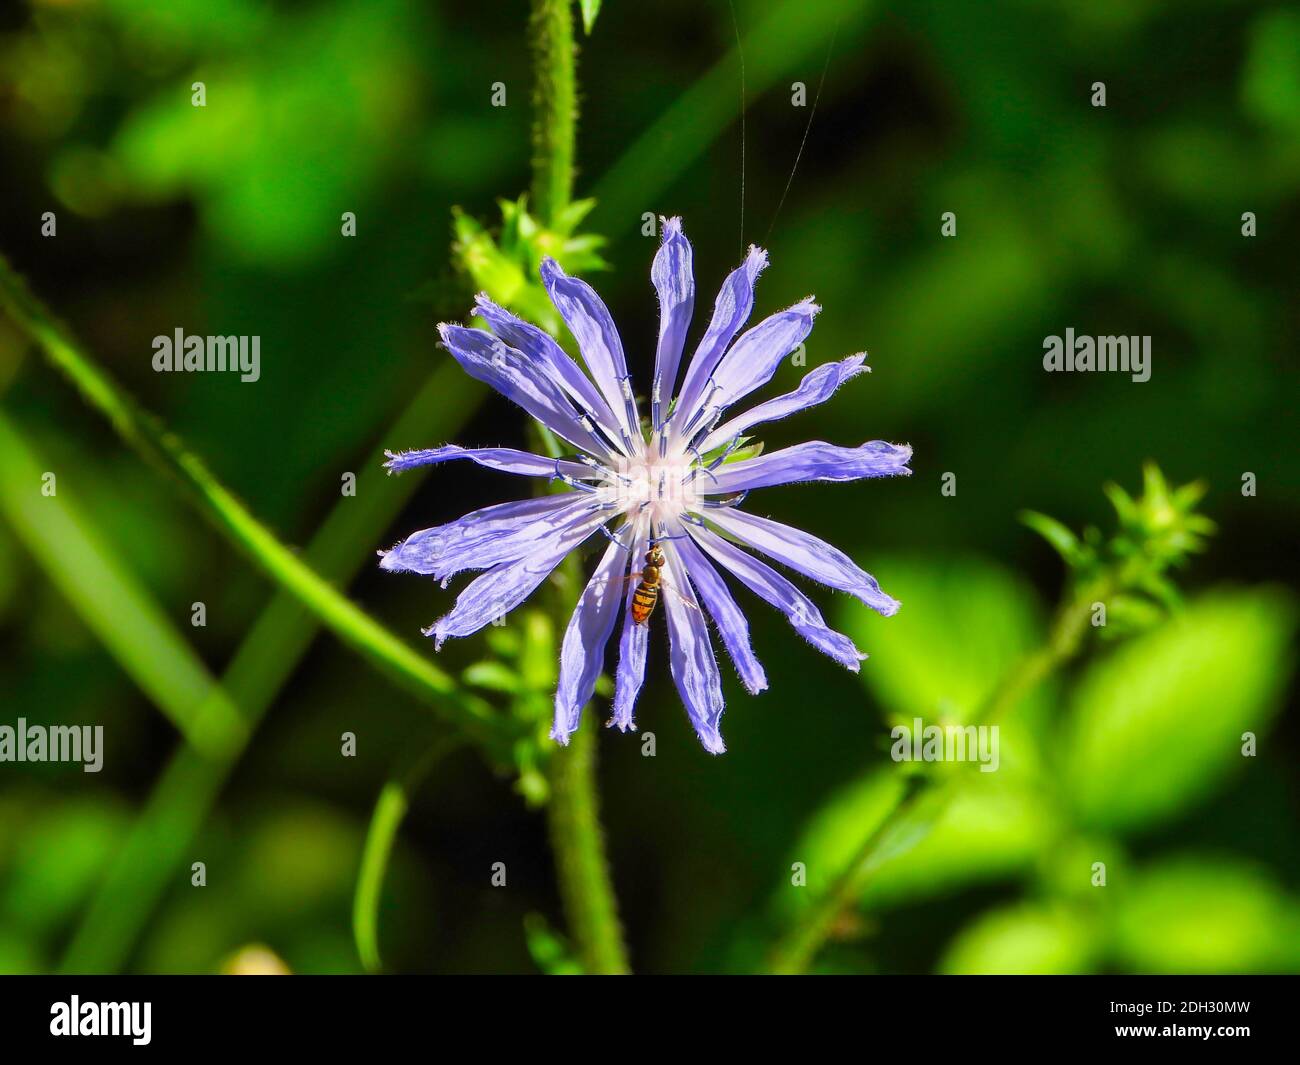 Common chicory (Cichorium intybus) Blue Daisy Blue Dandelion Wildflower Shriveled Up with Small Bee on Petal and Spider Web Silk on Top Petal in Late Stock Photo